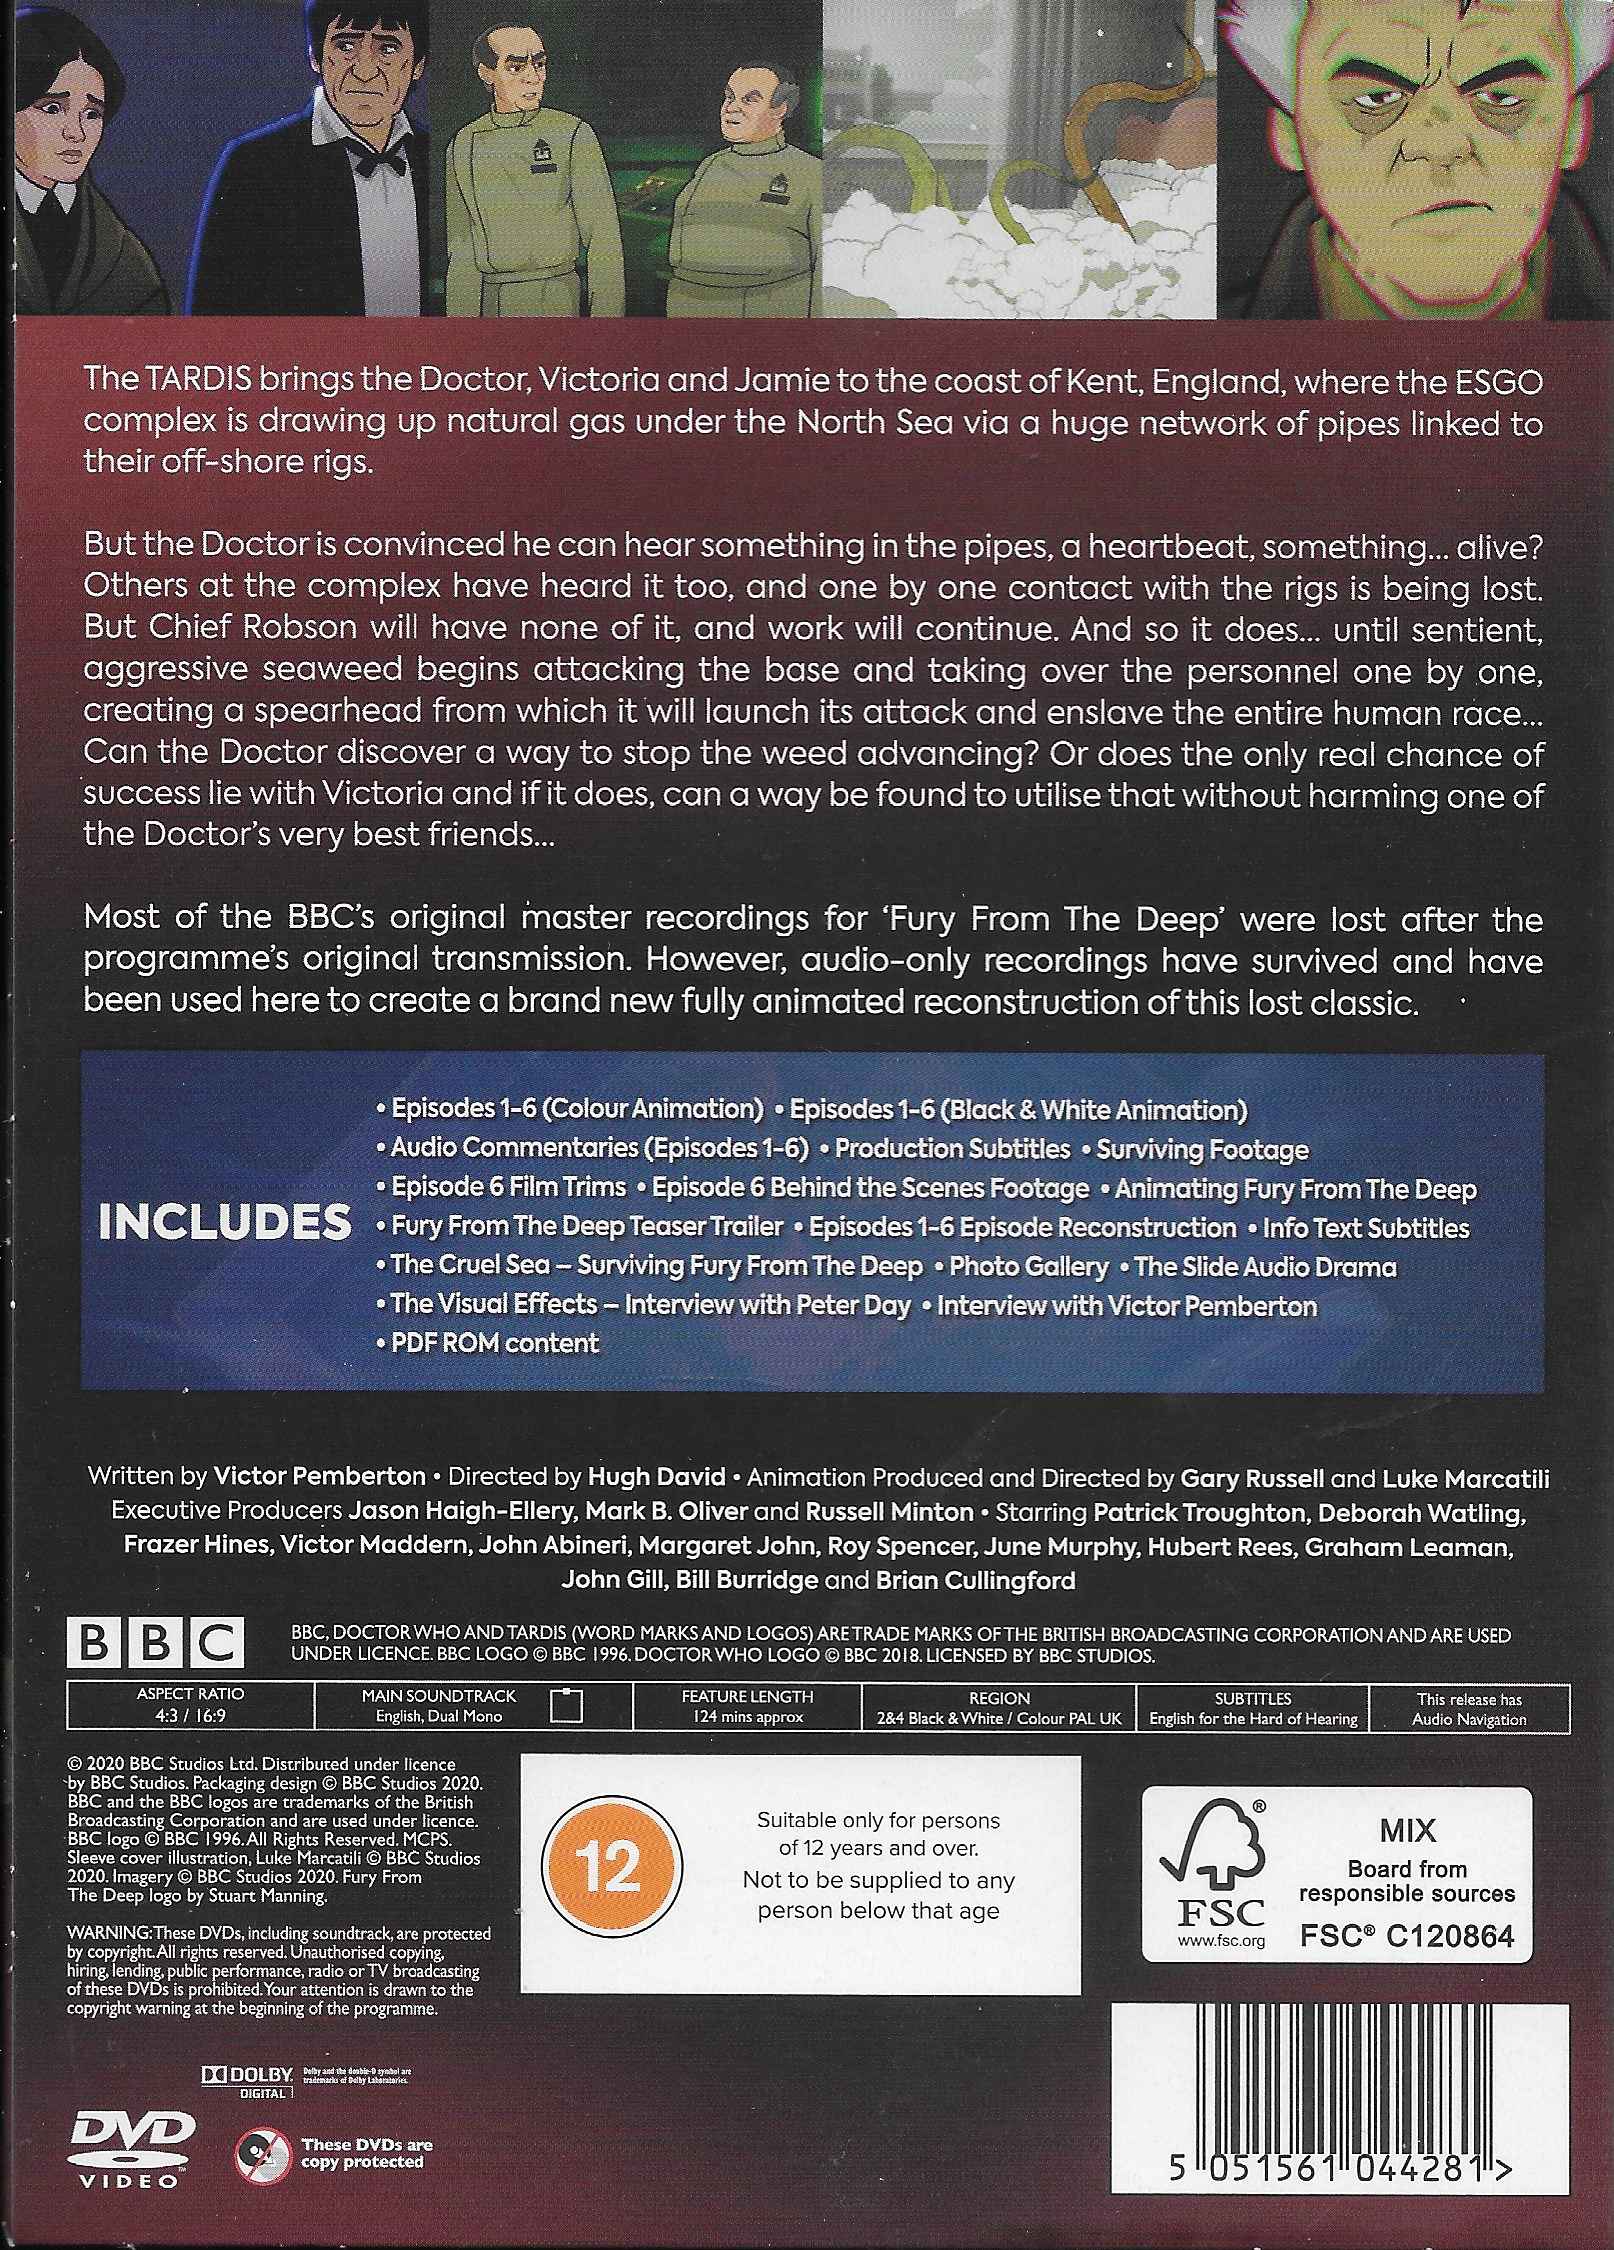 Picture of BBCDVD 4428 Doctor Who - Fury from the deep by artist Victor Pemberton from the BBC records and Tapes library